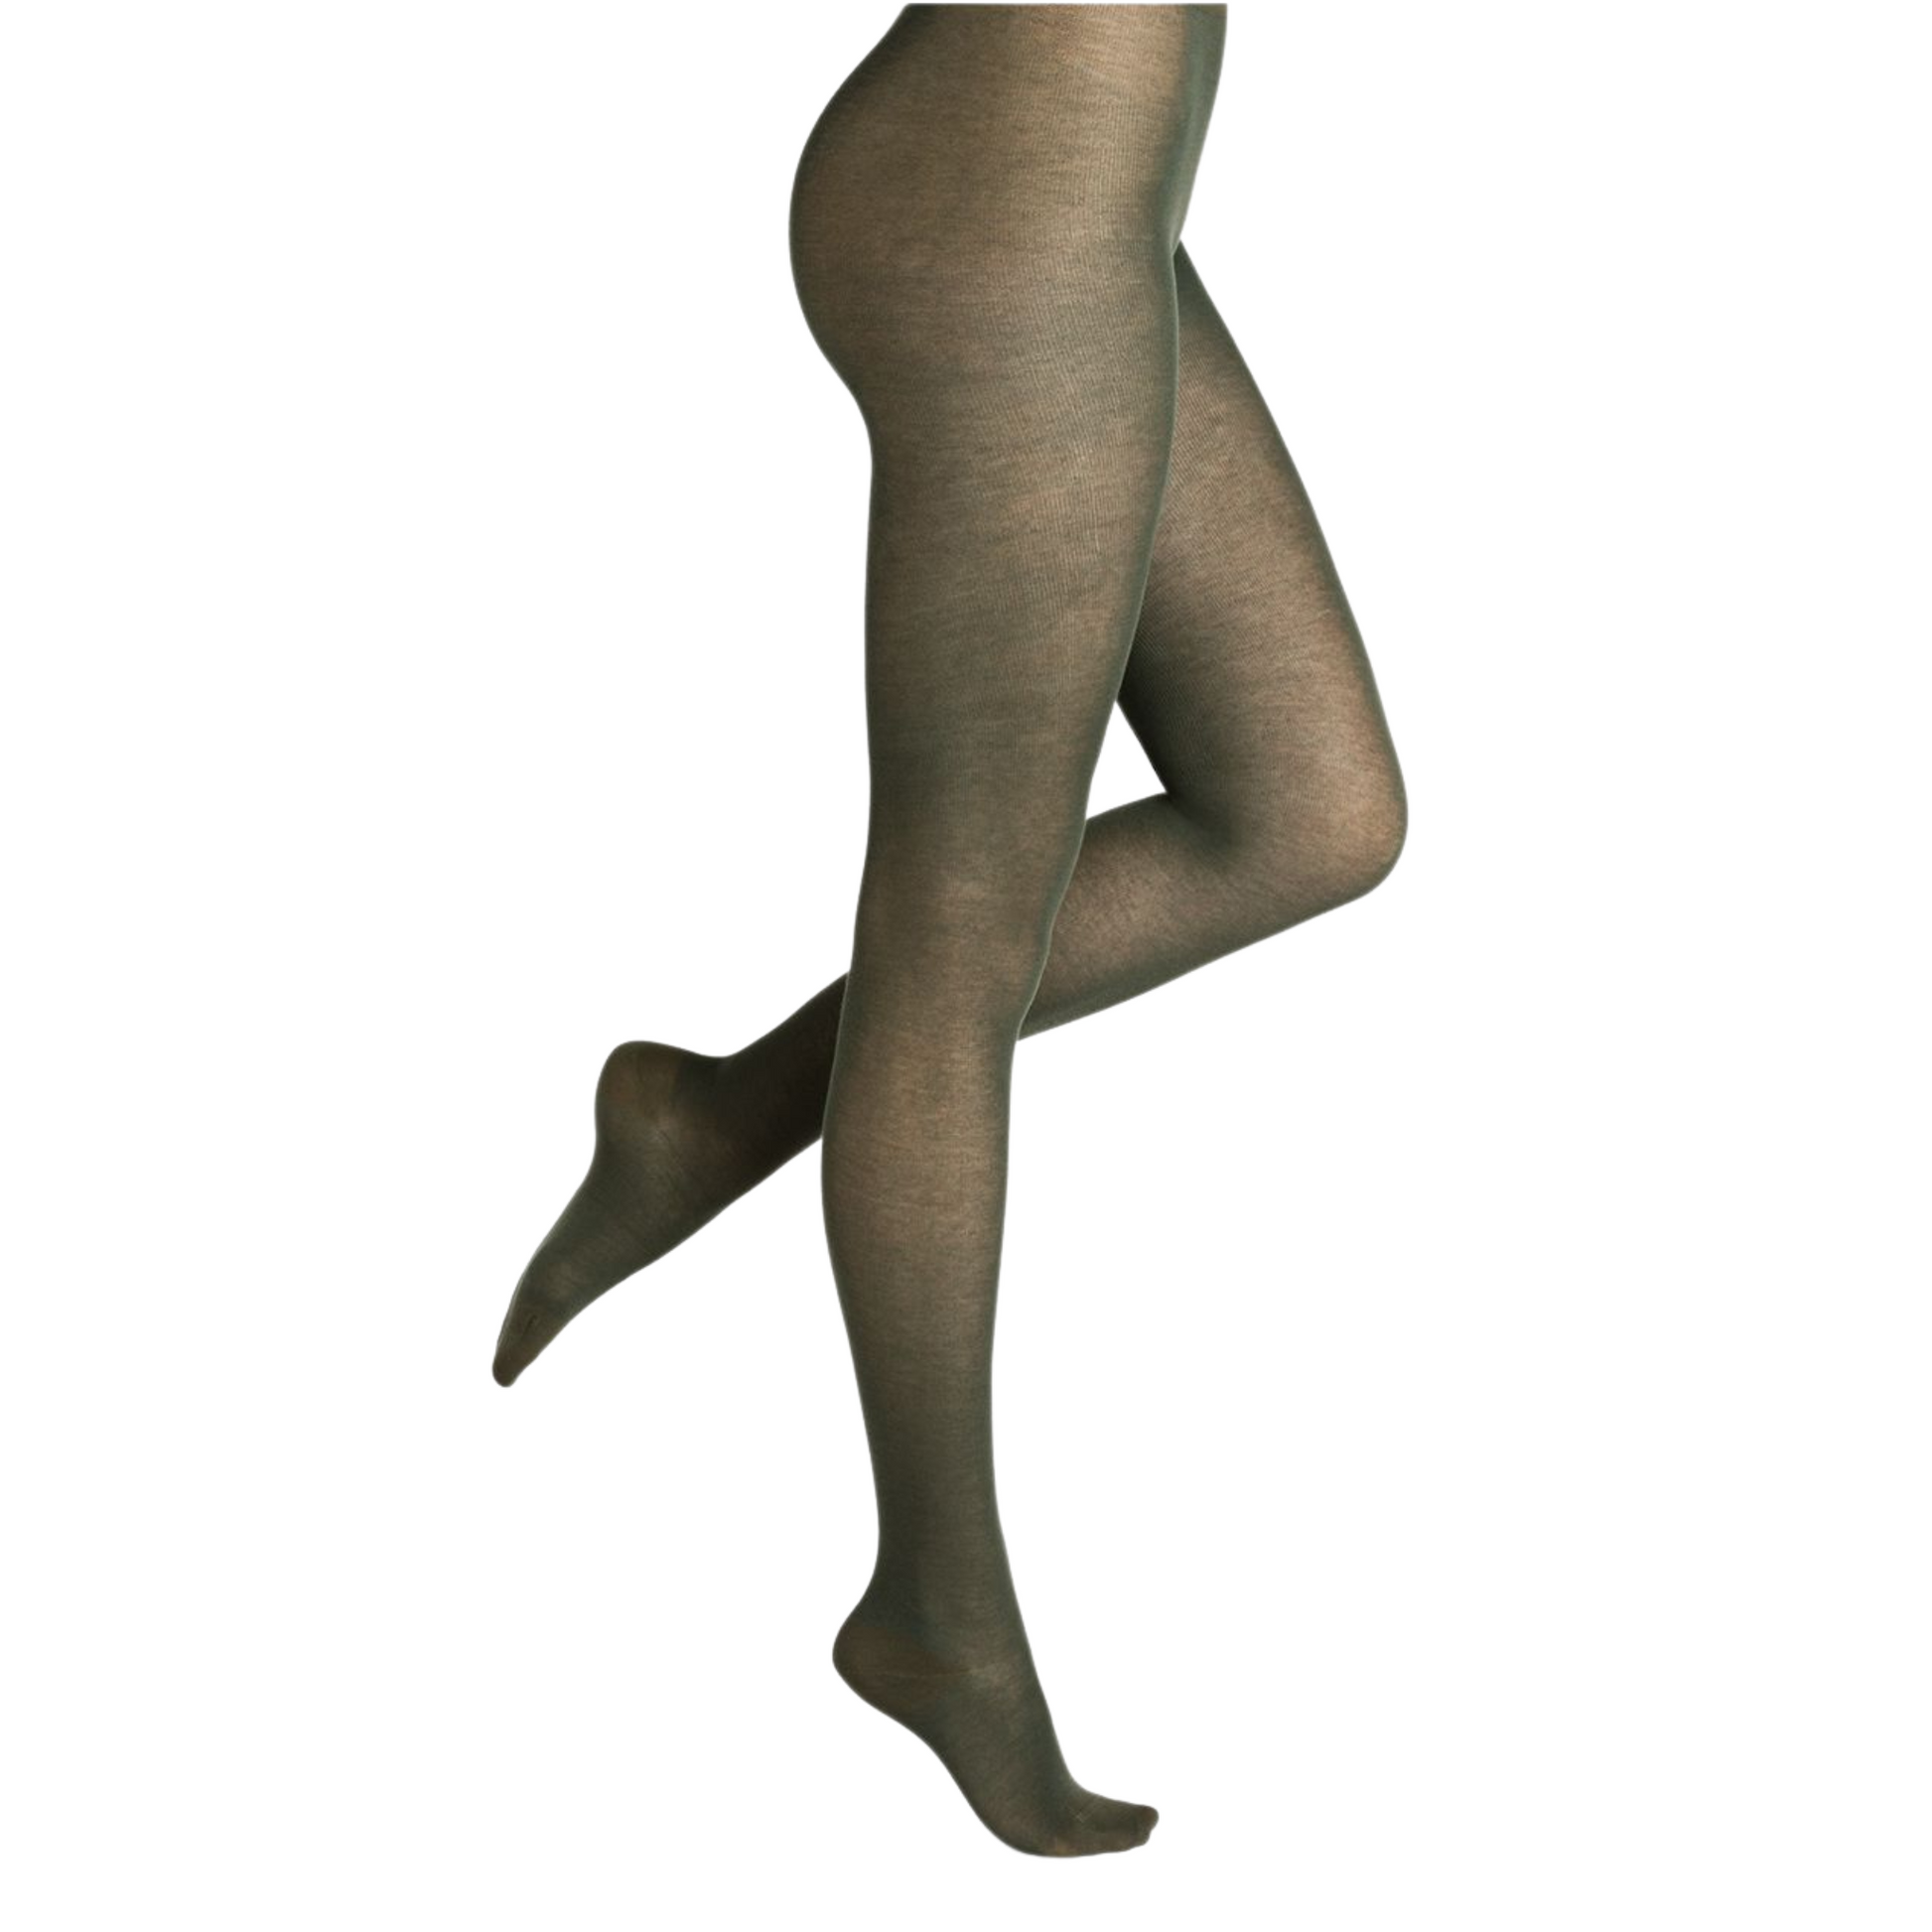 Green and Blue Plaid Patterned Tights Women's Opaque Print Pantyhose  Available in Plus Size Gift for Her -  Canada